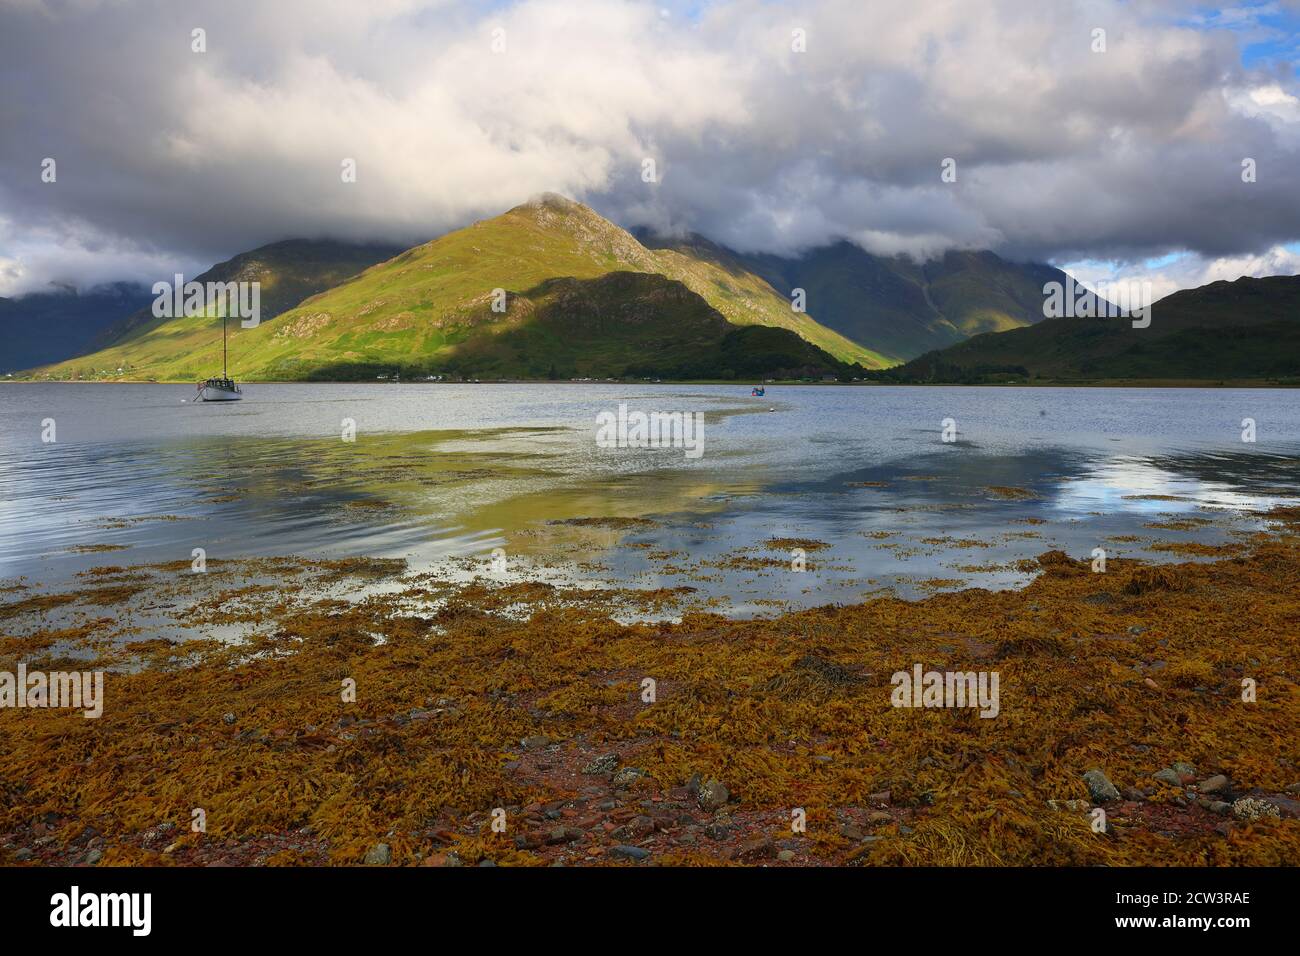 Landscape image of the Kintail Mountain range from the shores of Loch Duich, Glen Shiel, West Highlands, Scotland, UK. Stock Photo